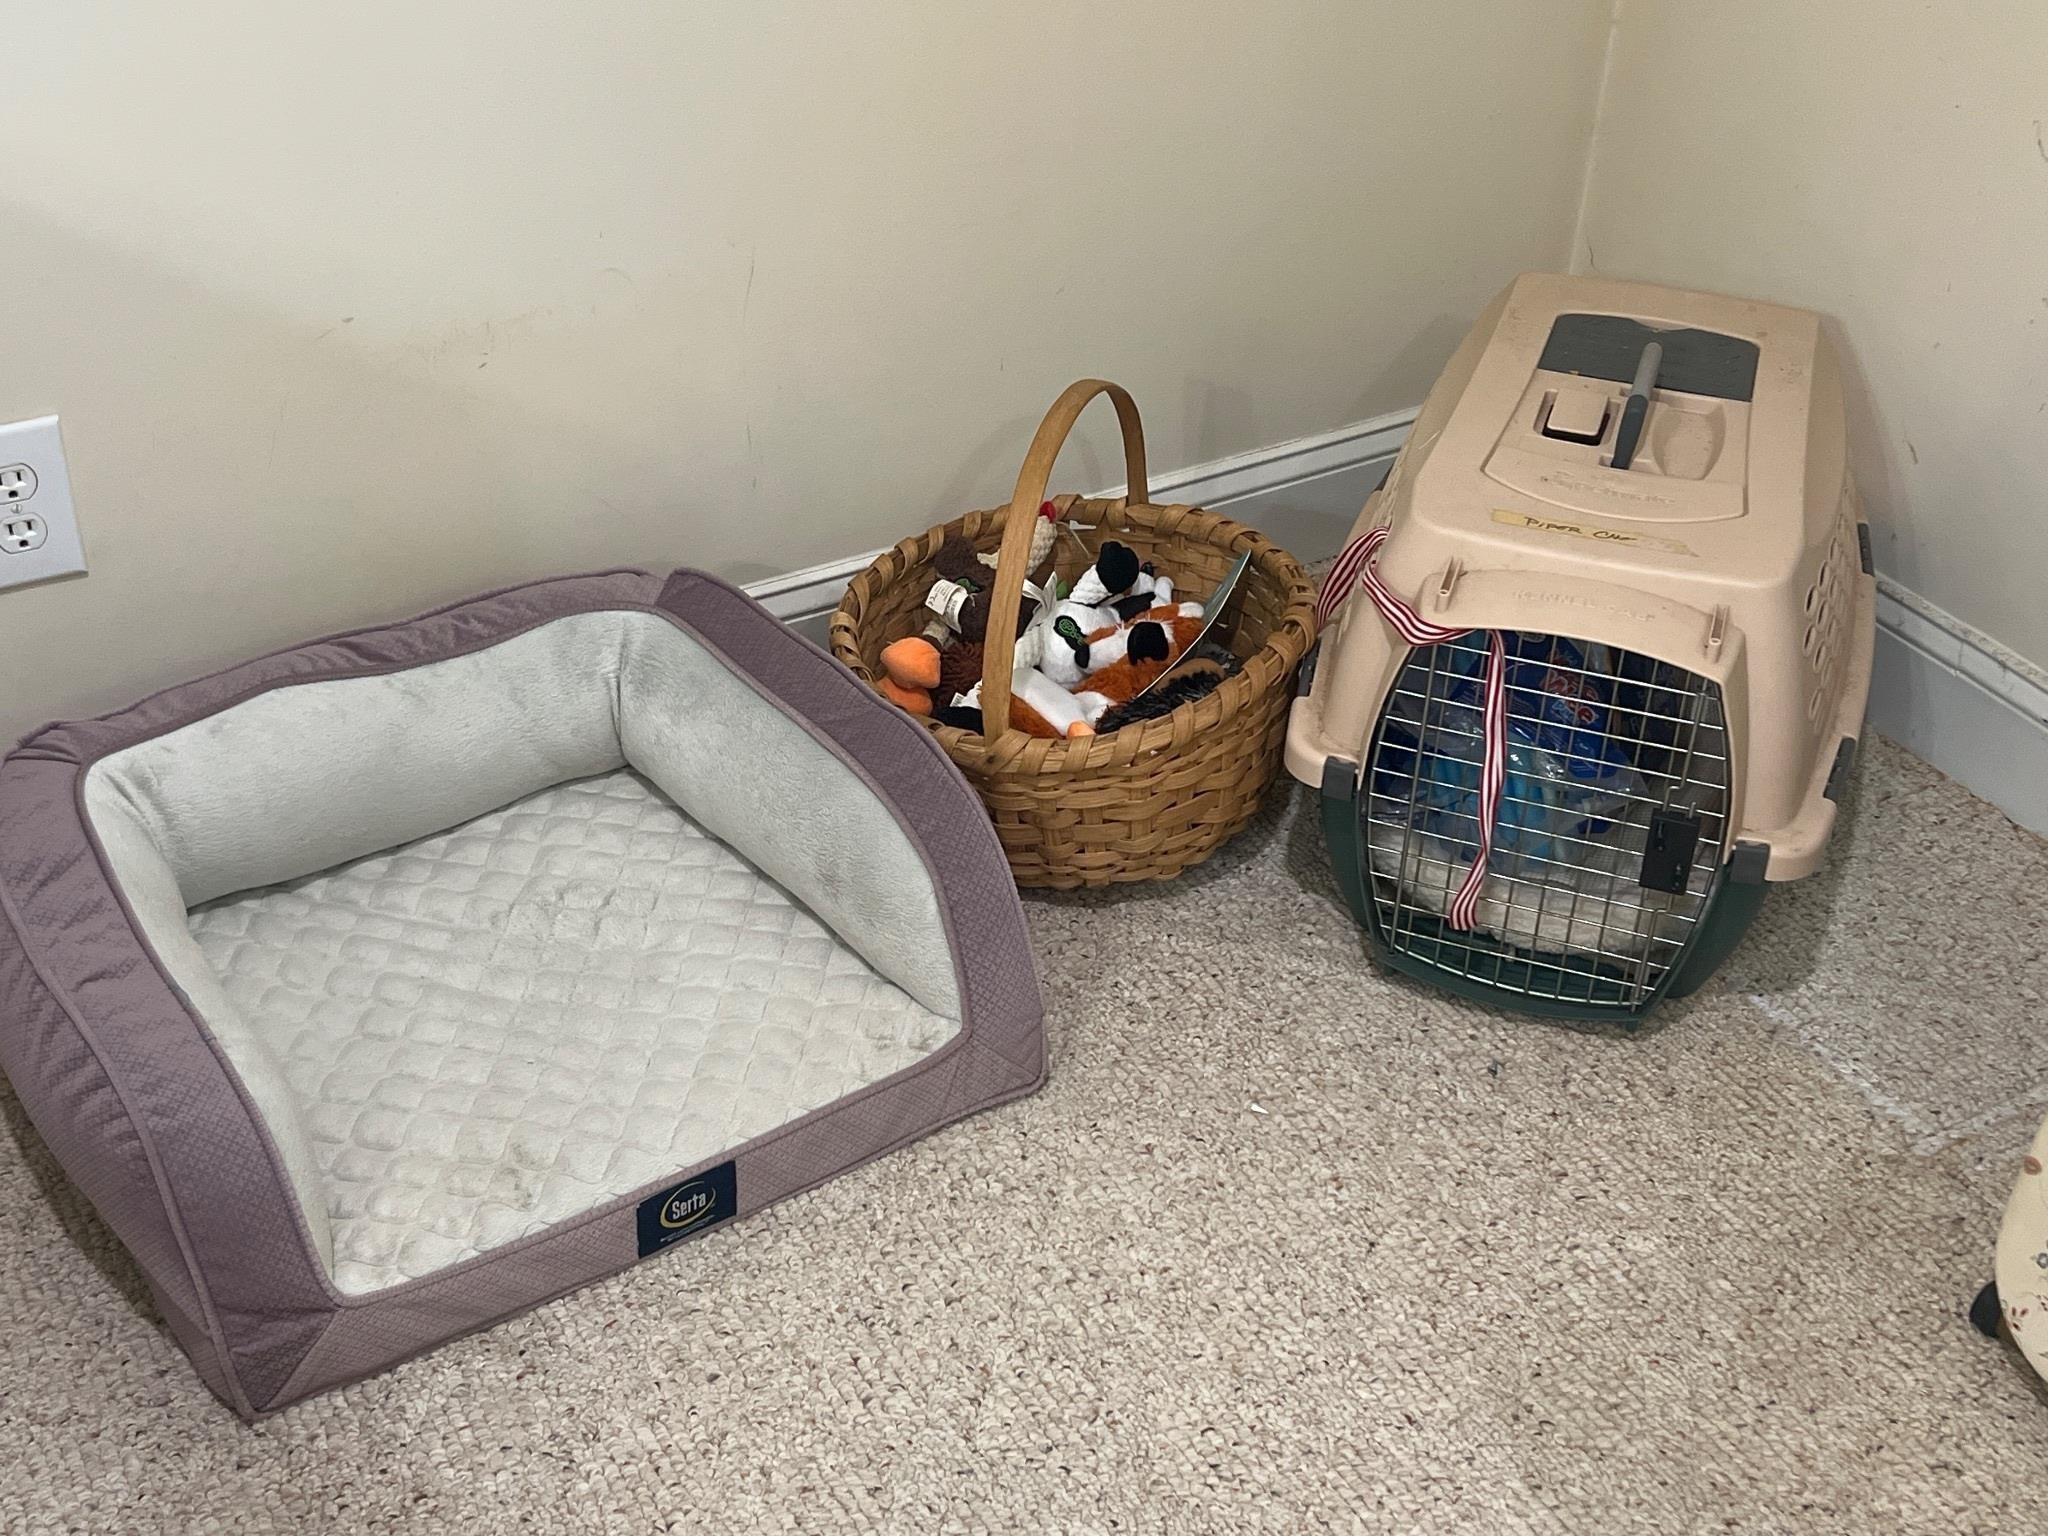 Pet carriers and toys